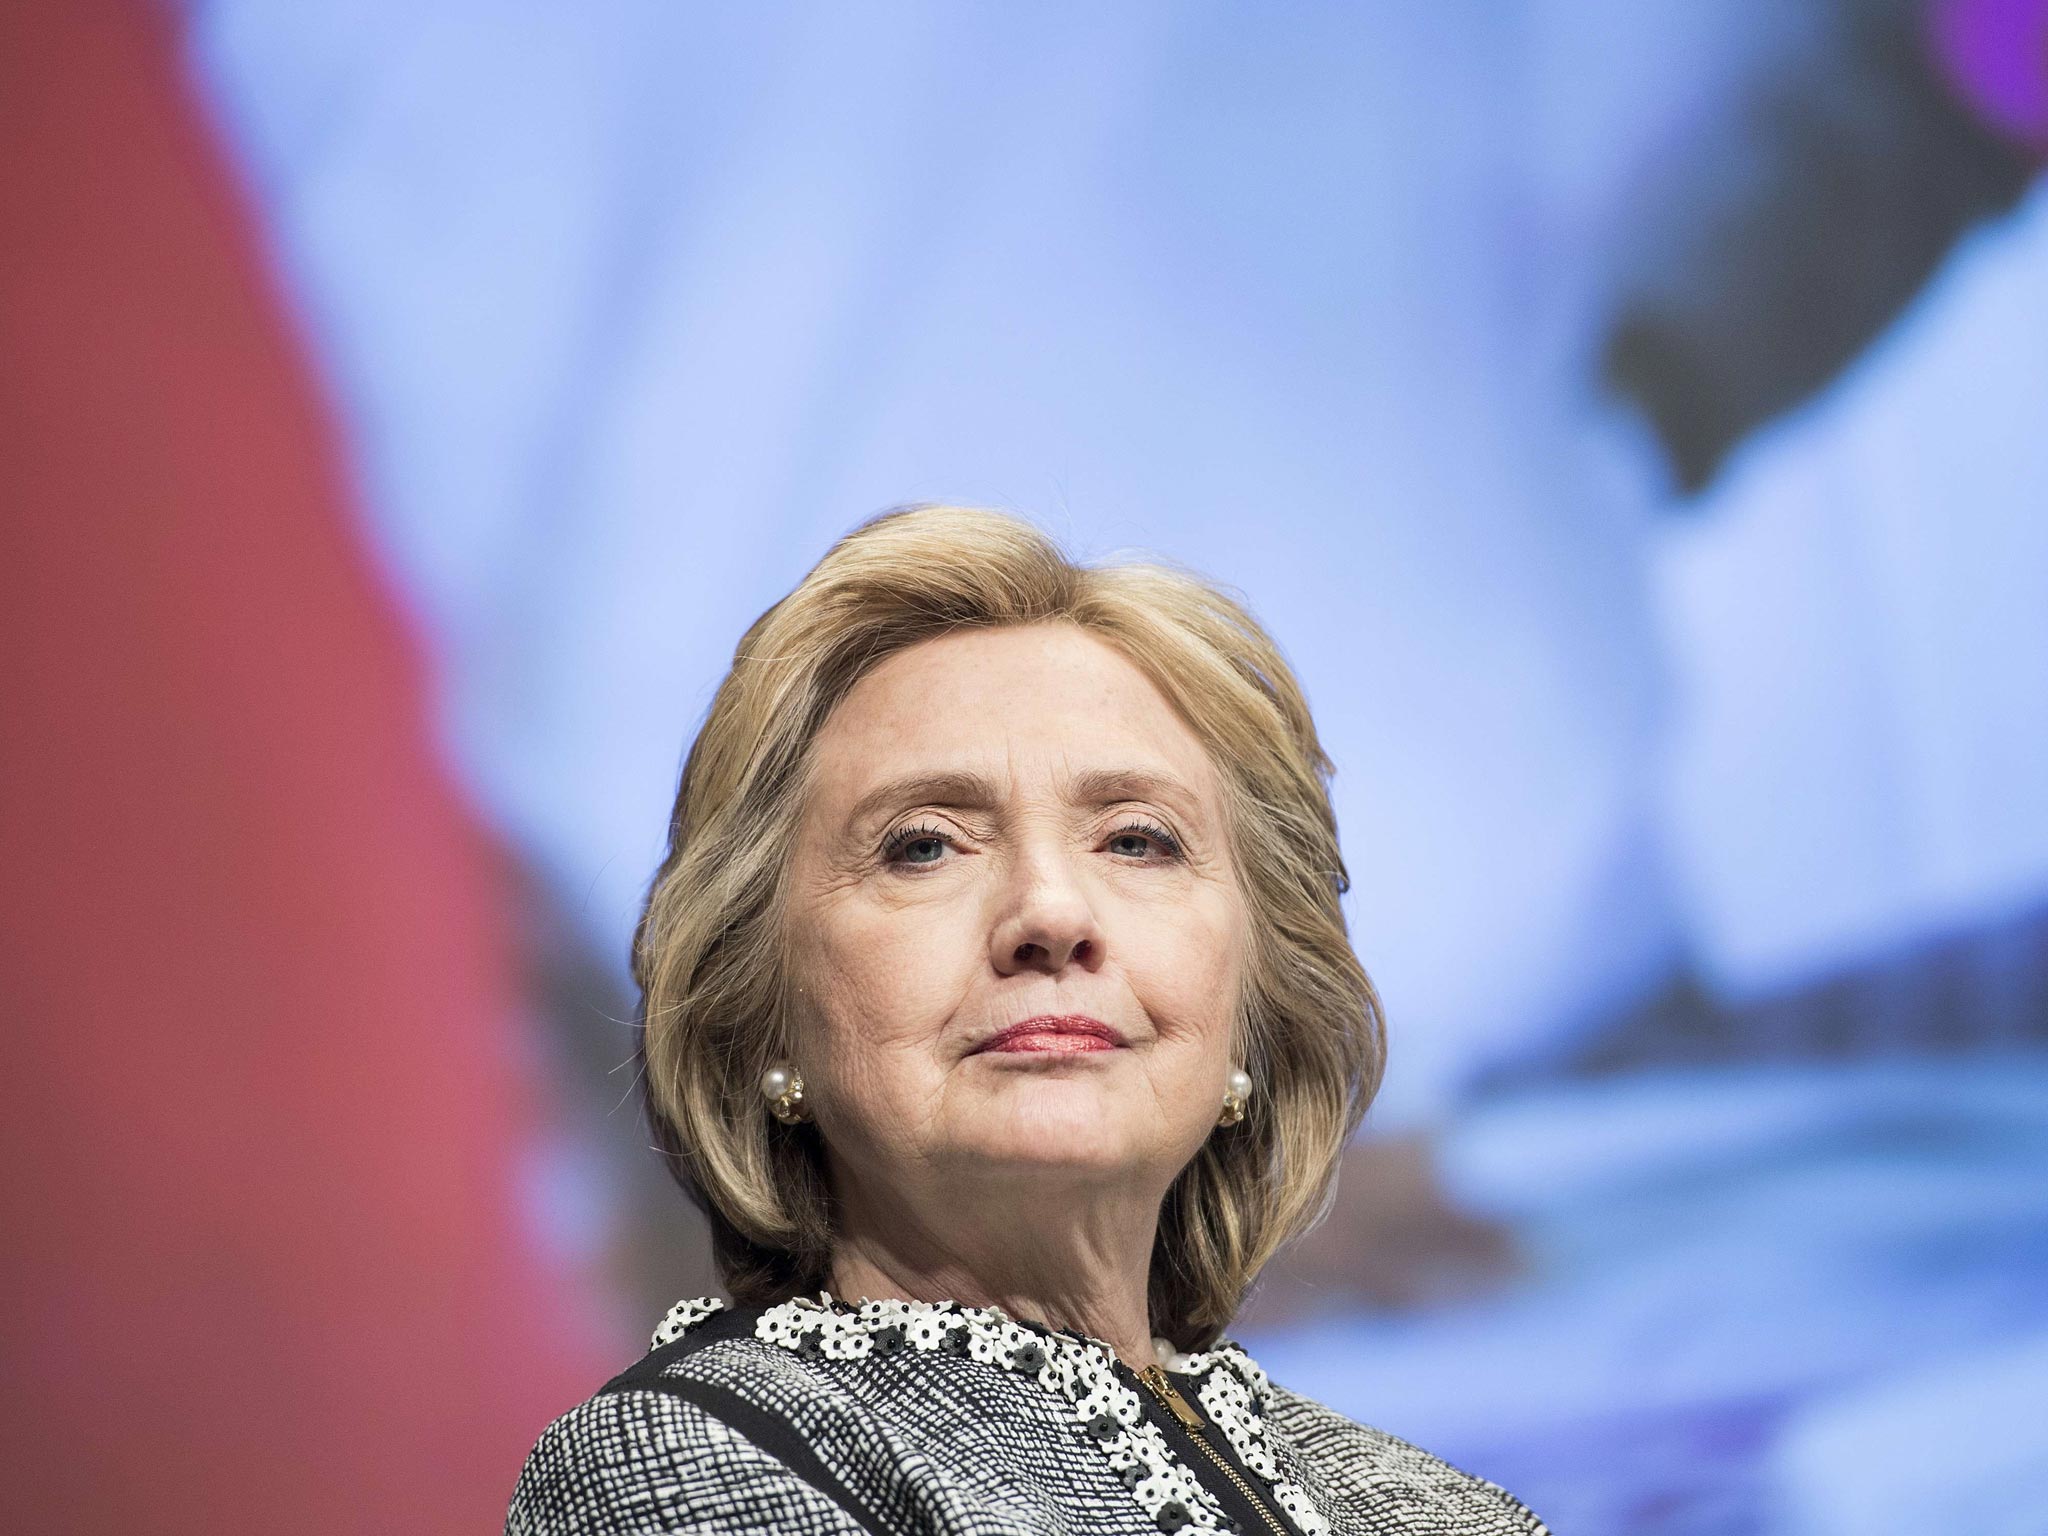 Hillary Clinton has already had to fend off questions about her health, and will be 69 by election day 2016